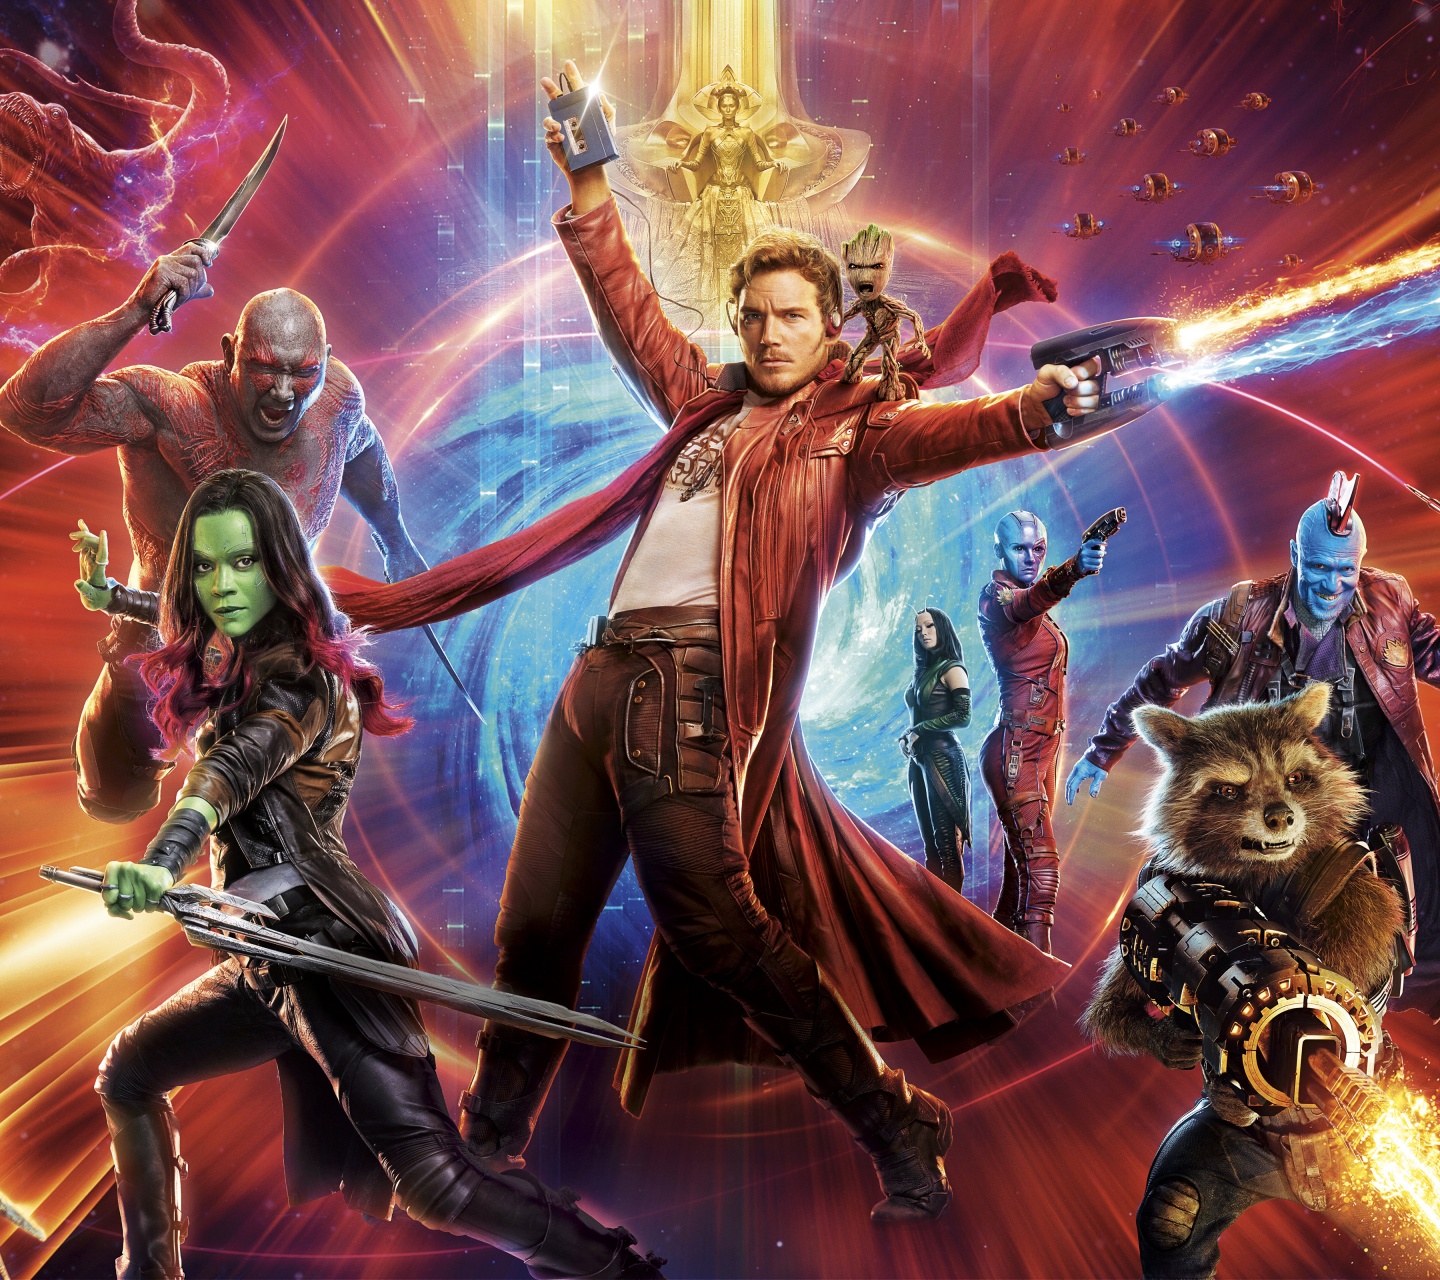 Guardians Of The Galaxy 2